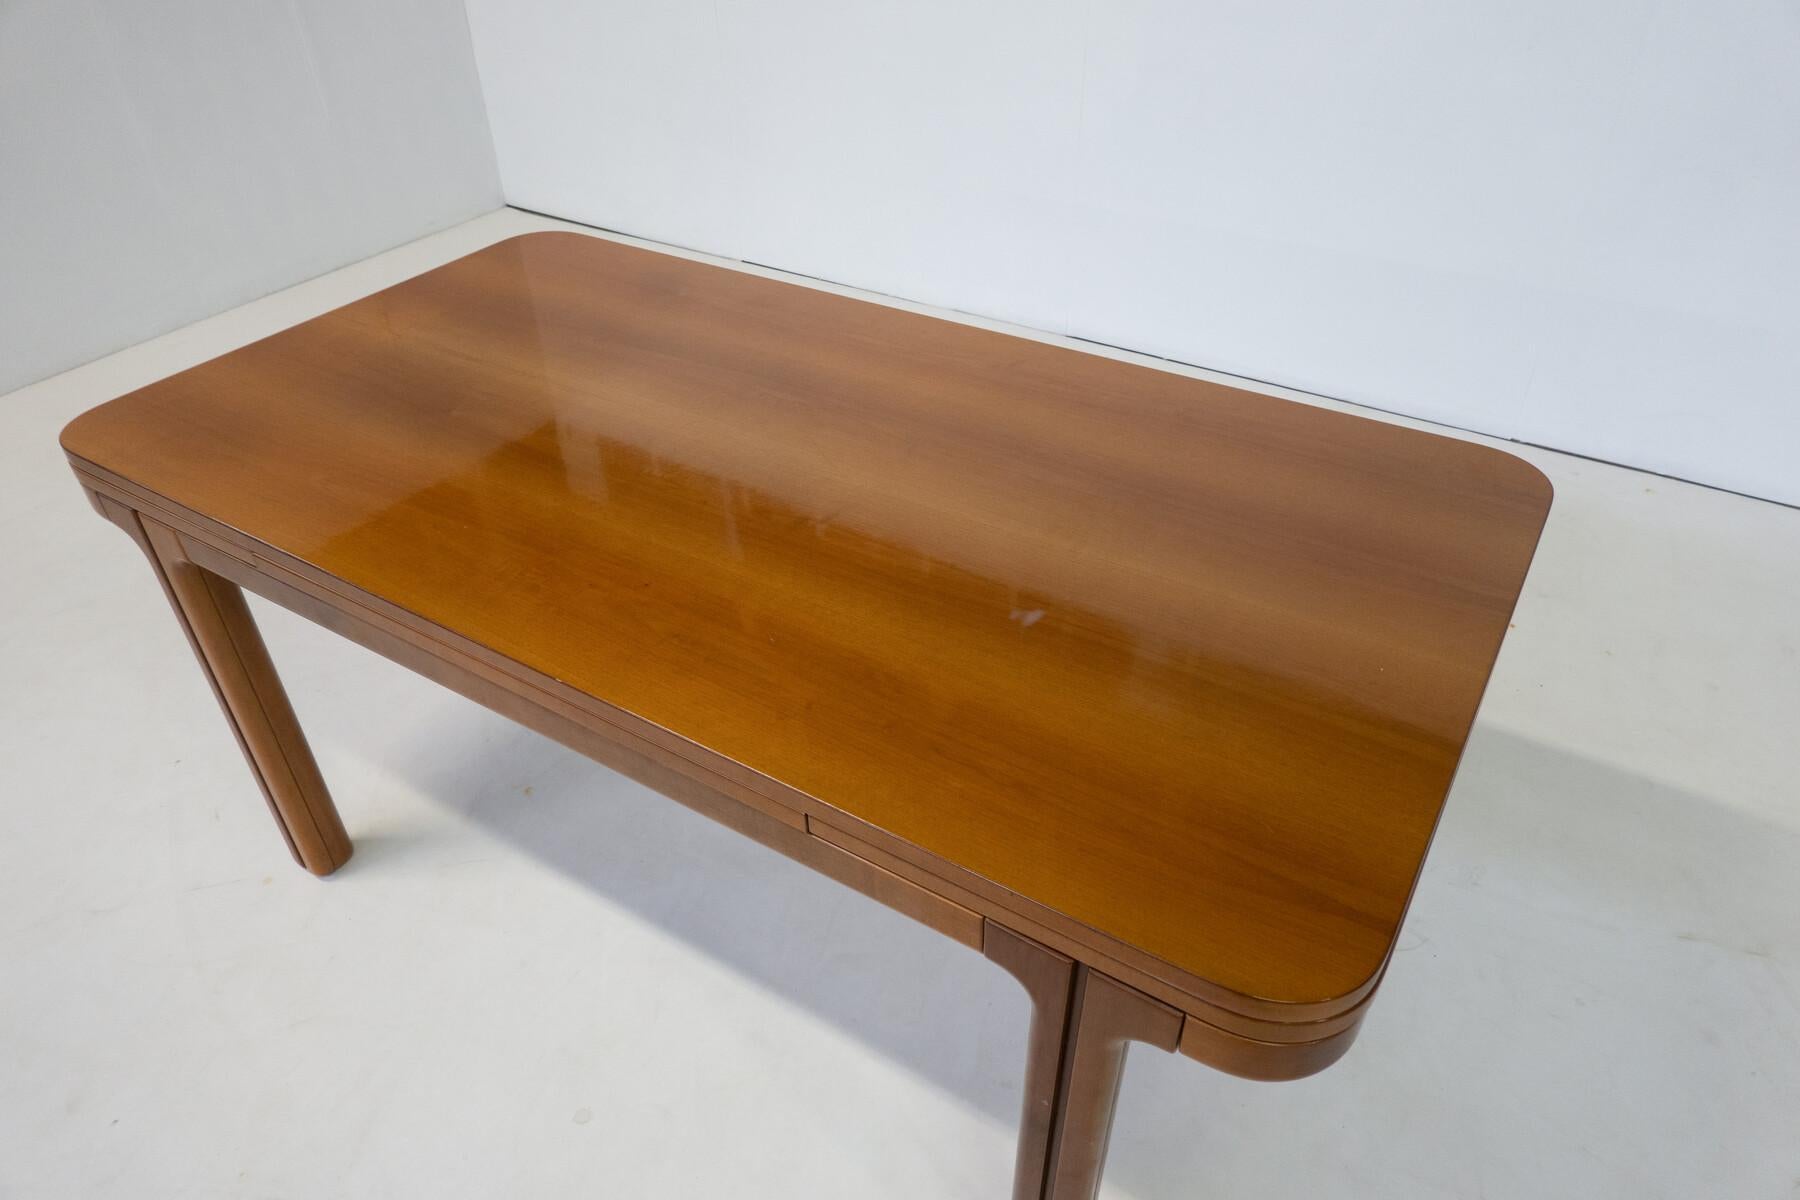 Mid-20th Century Mid-Century Modern Extendable Dining Table by Llmari Tapiovaara, Finland, 1950s For Sale